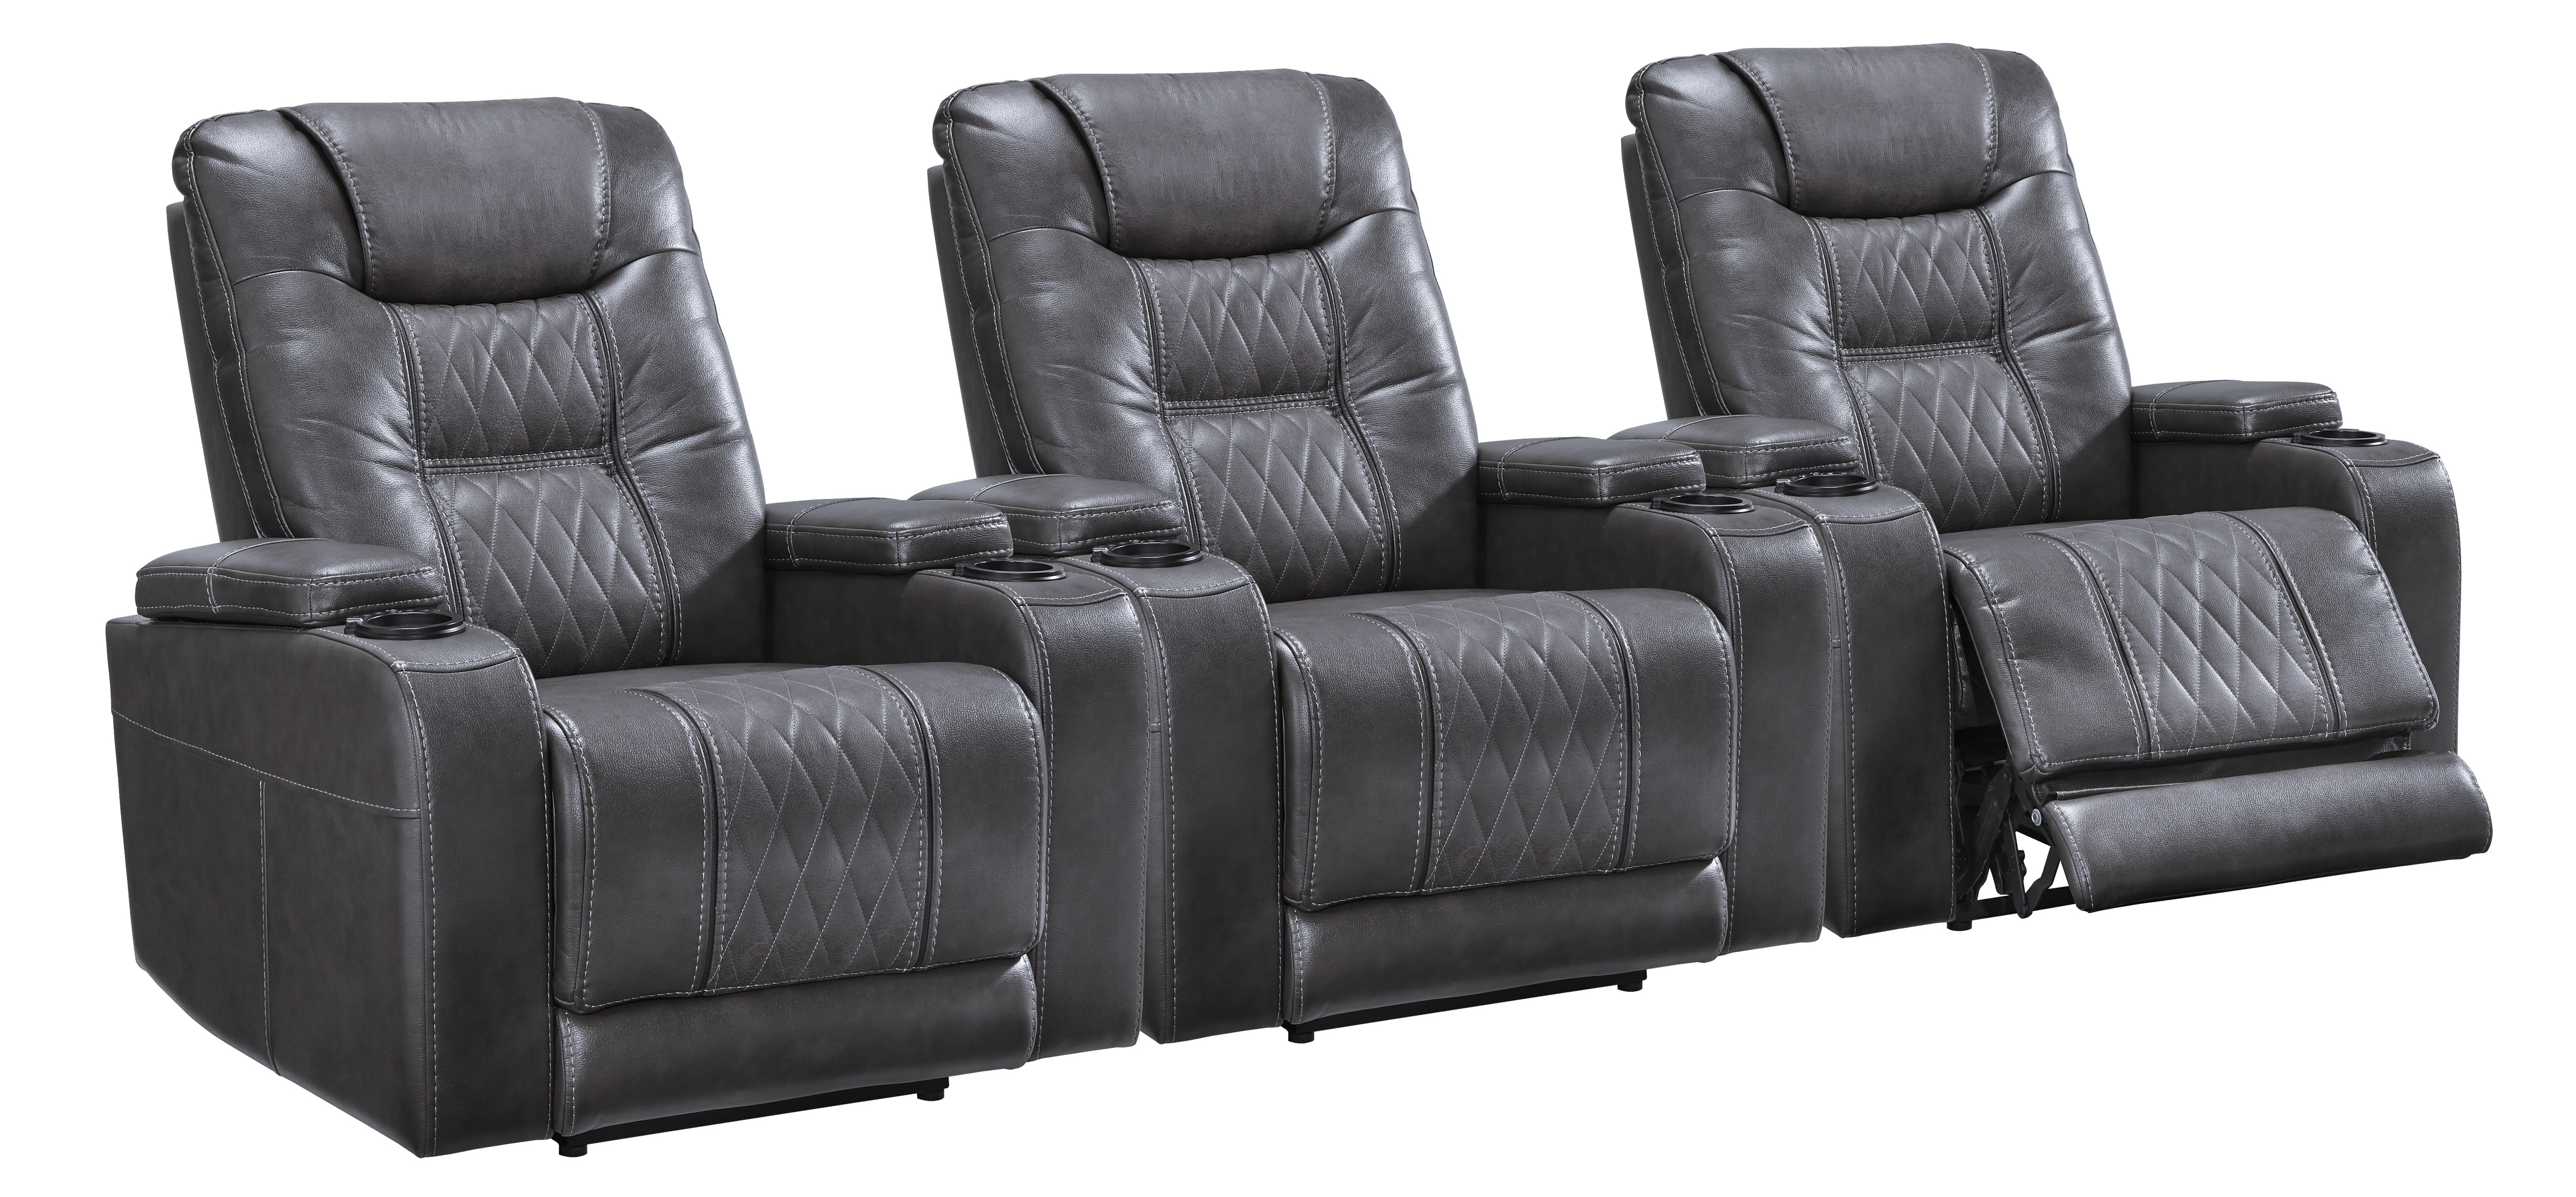 Ashley Composer Series Home Theater Seating 3 peice set up